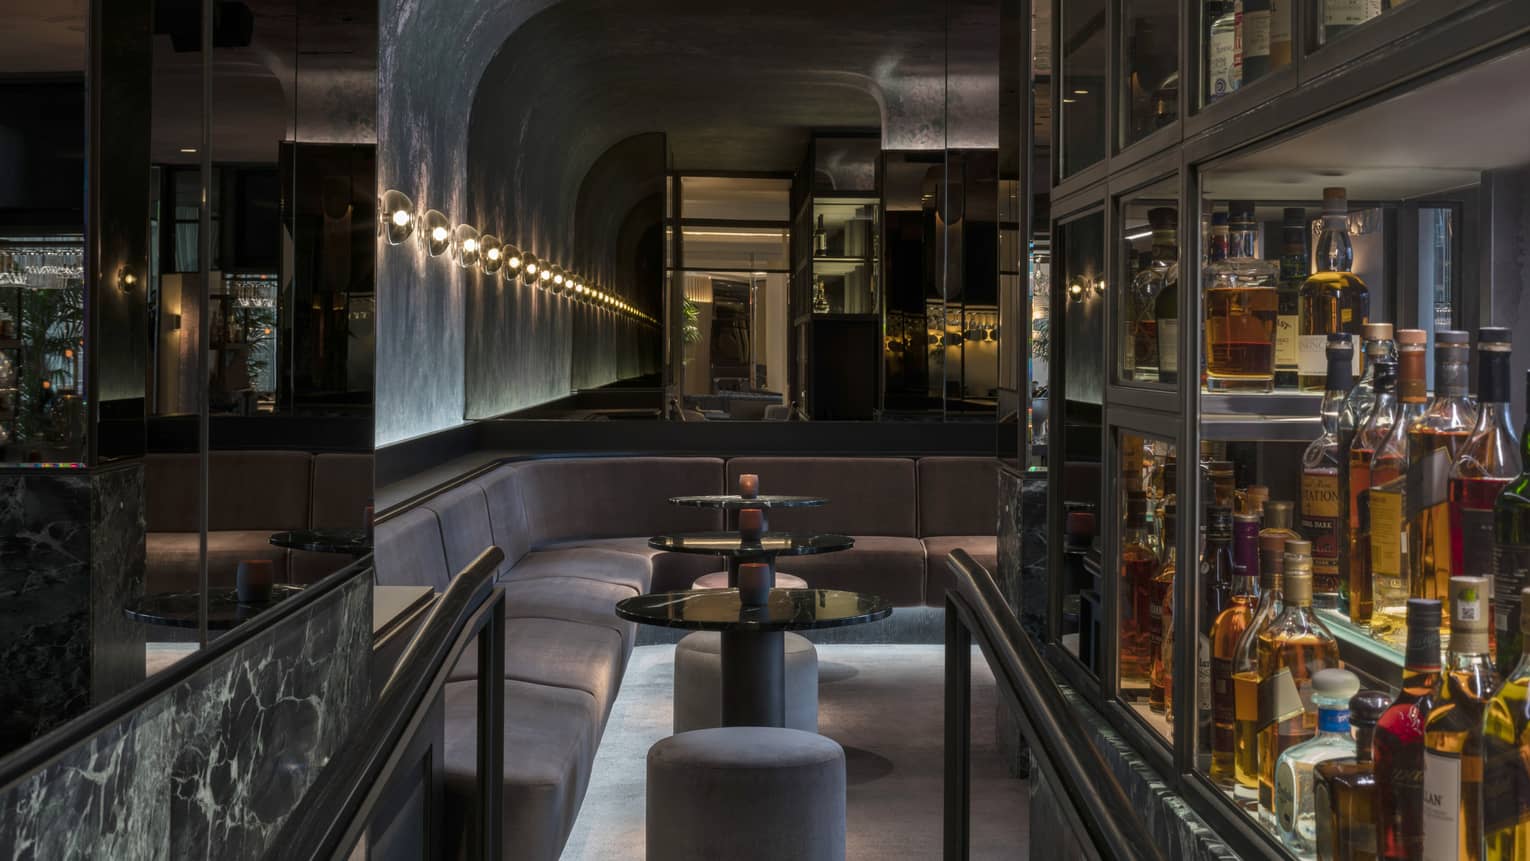 A velvet banquet and three round cocktail tables line the curved wall of MARCUS bar next to glass shelves holding bottle of spirits, all dimly lit